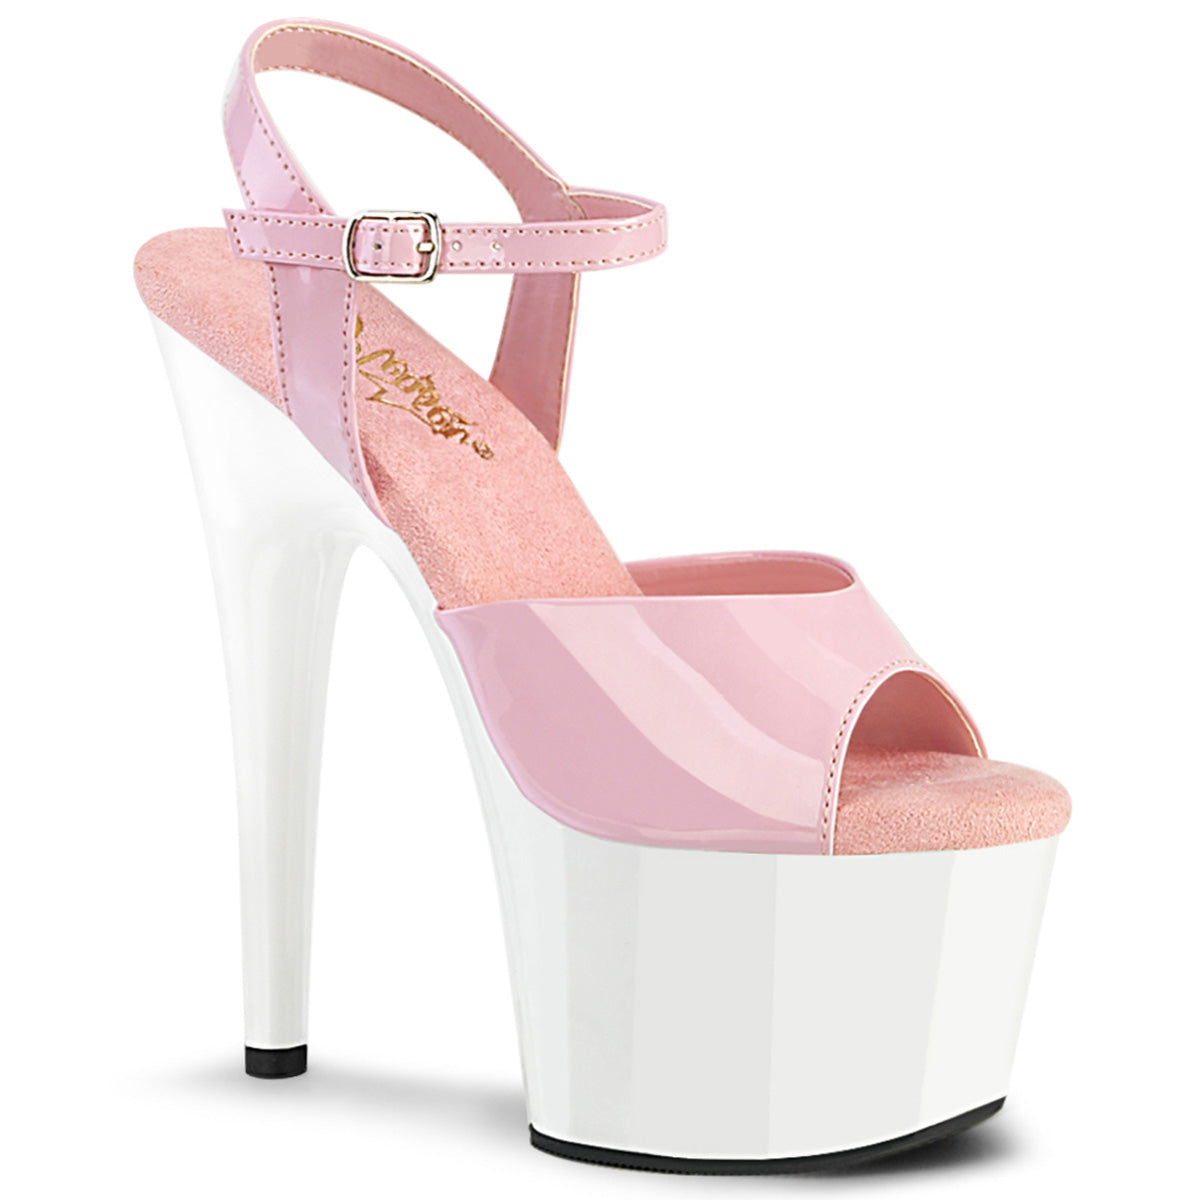 ADORE-709 Pink & White Open Toe High Heels